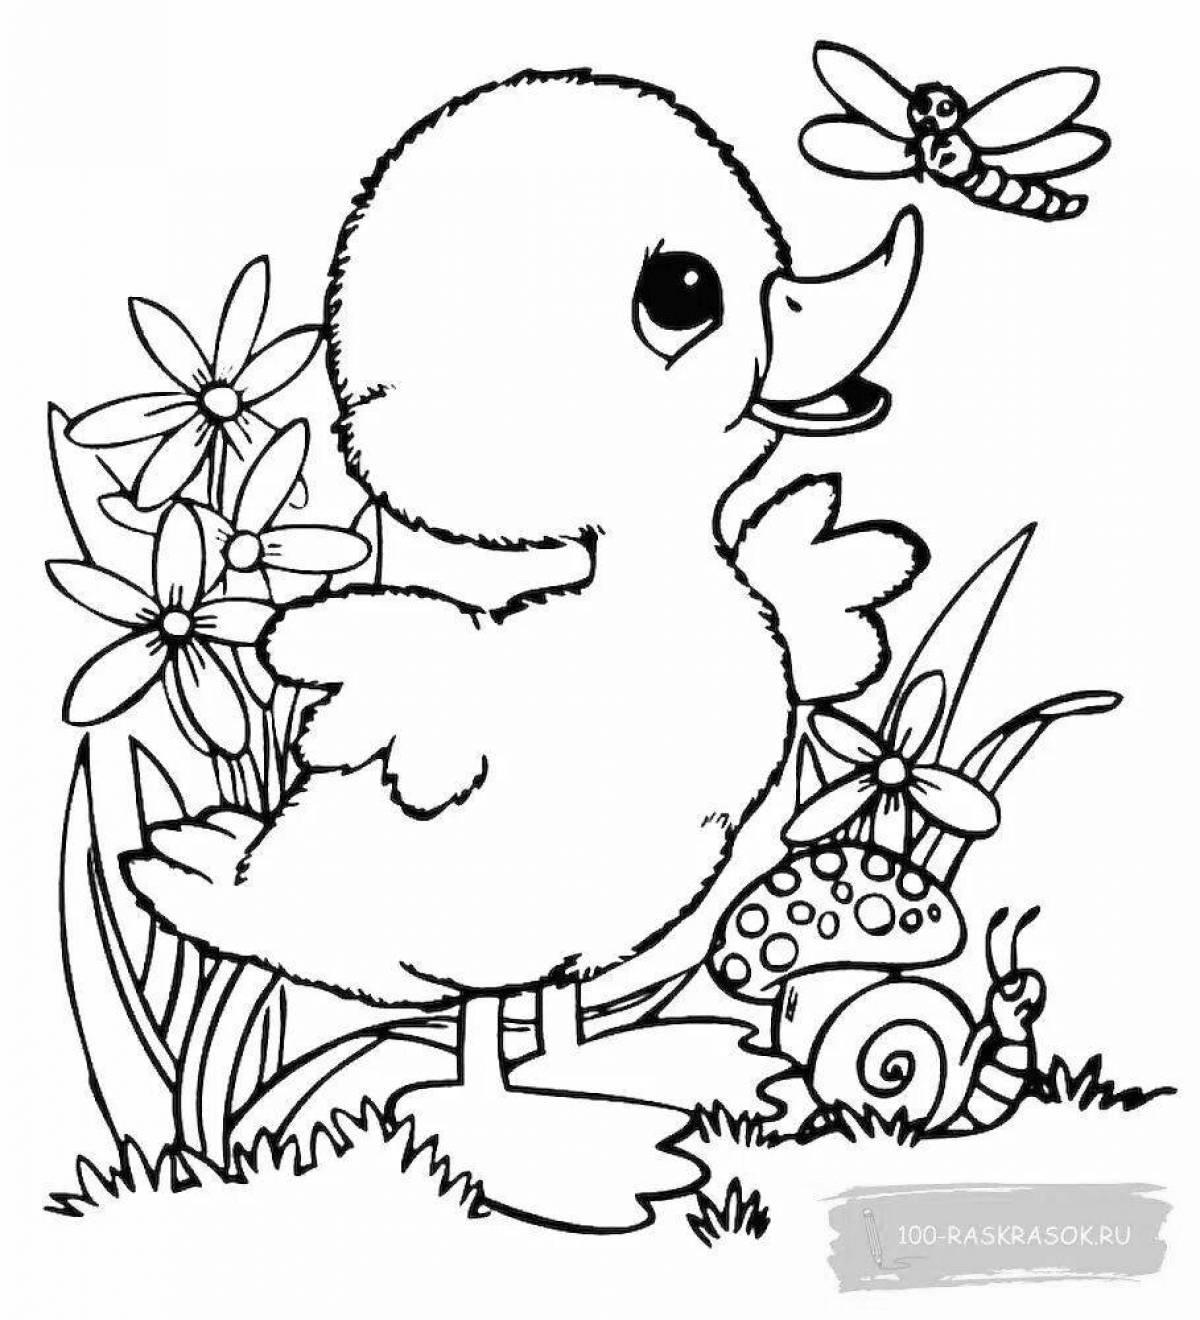 Chicken and duckling coloring page